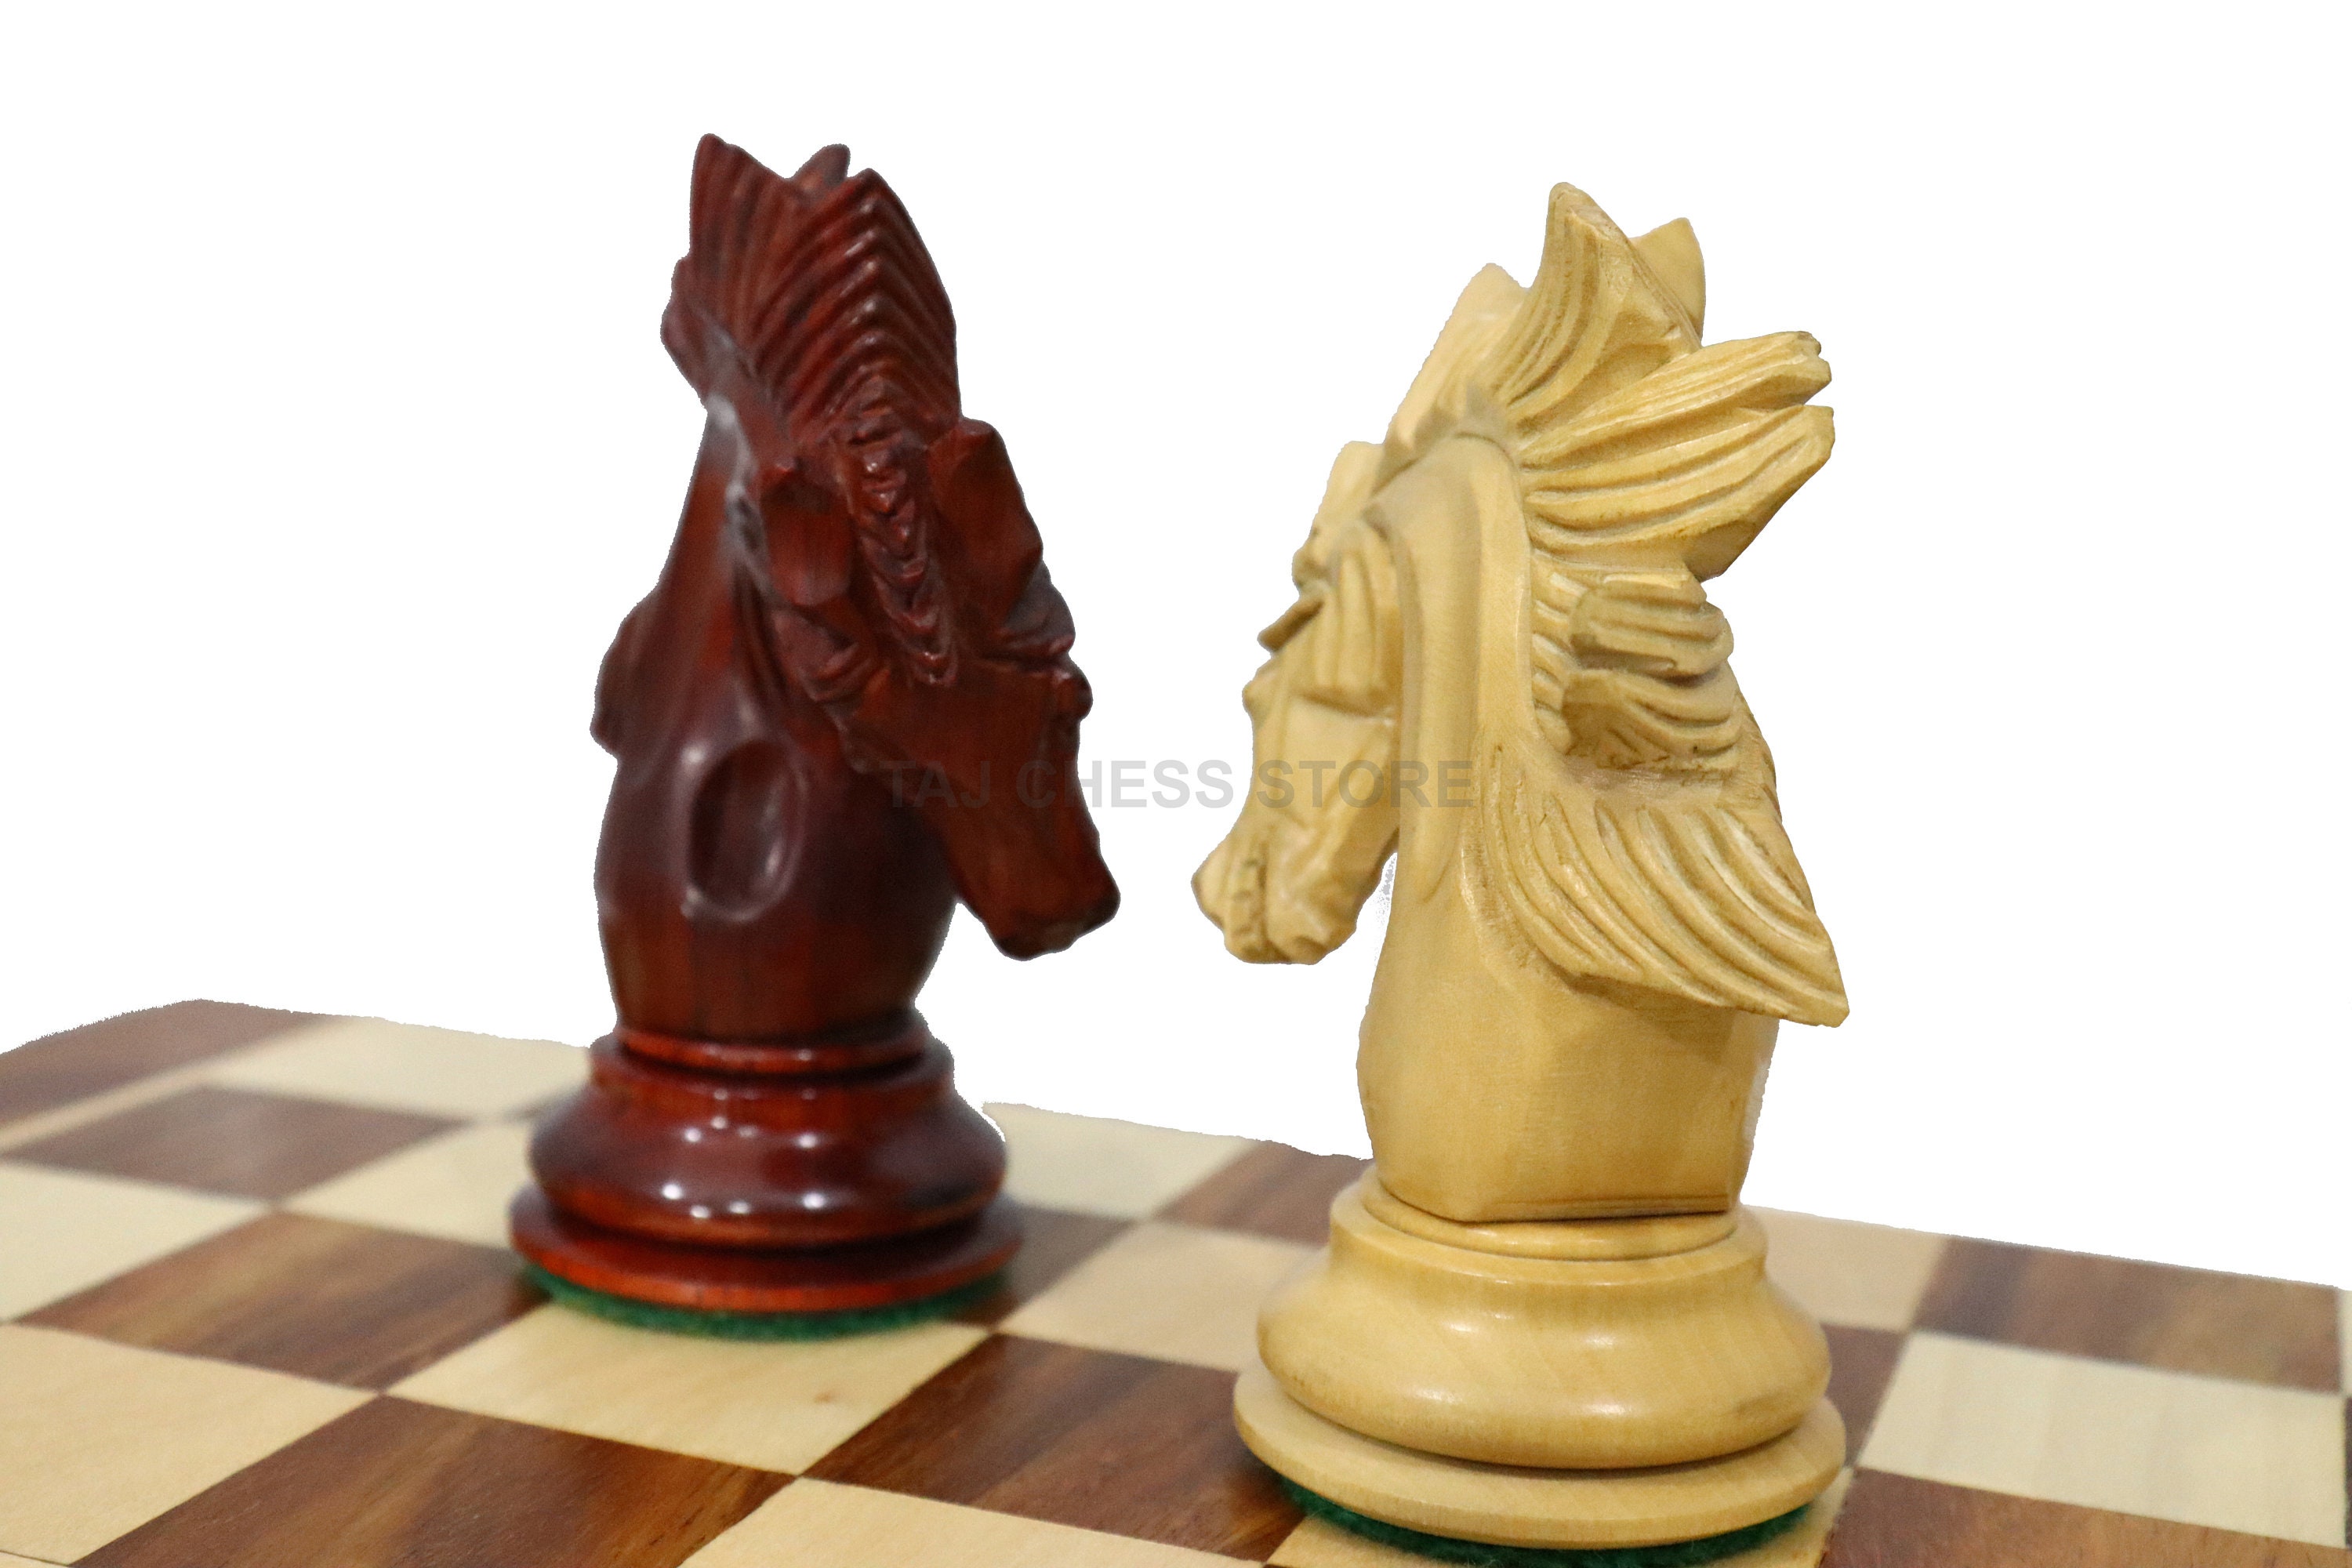 Shop for St. Petersburg Luxury Artisan Chess Set with Wooden Board.